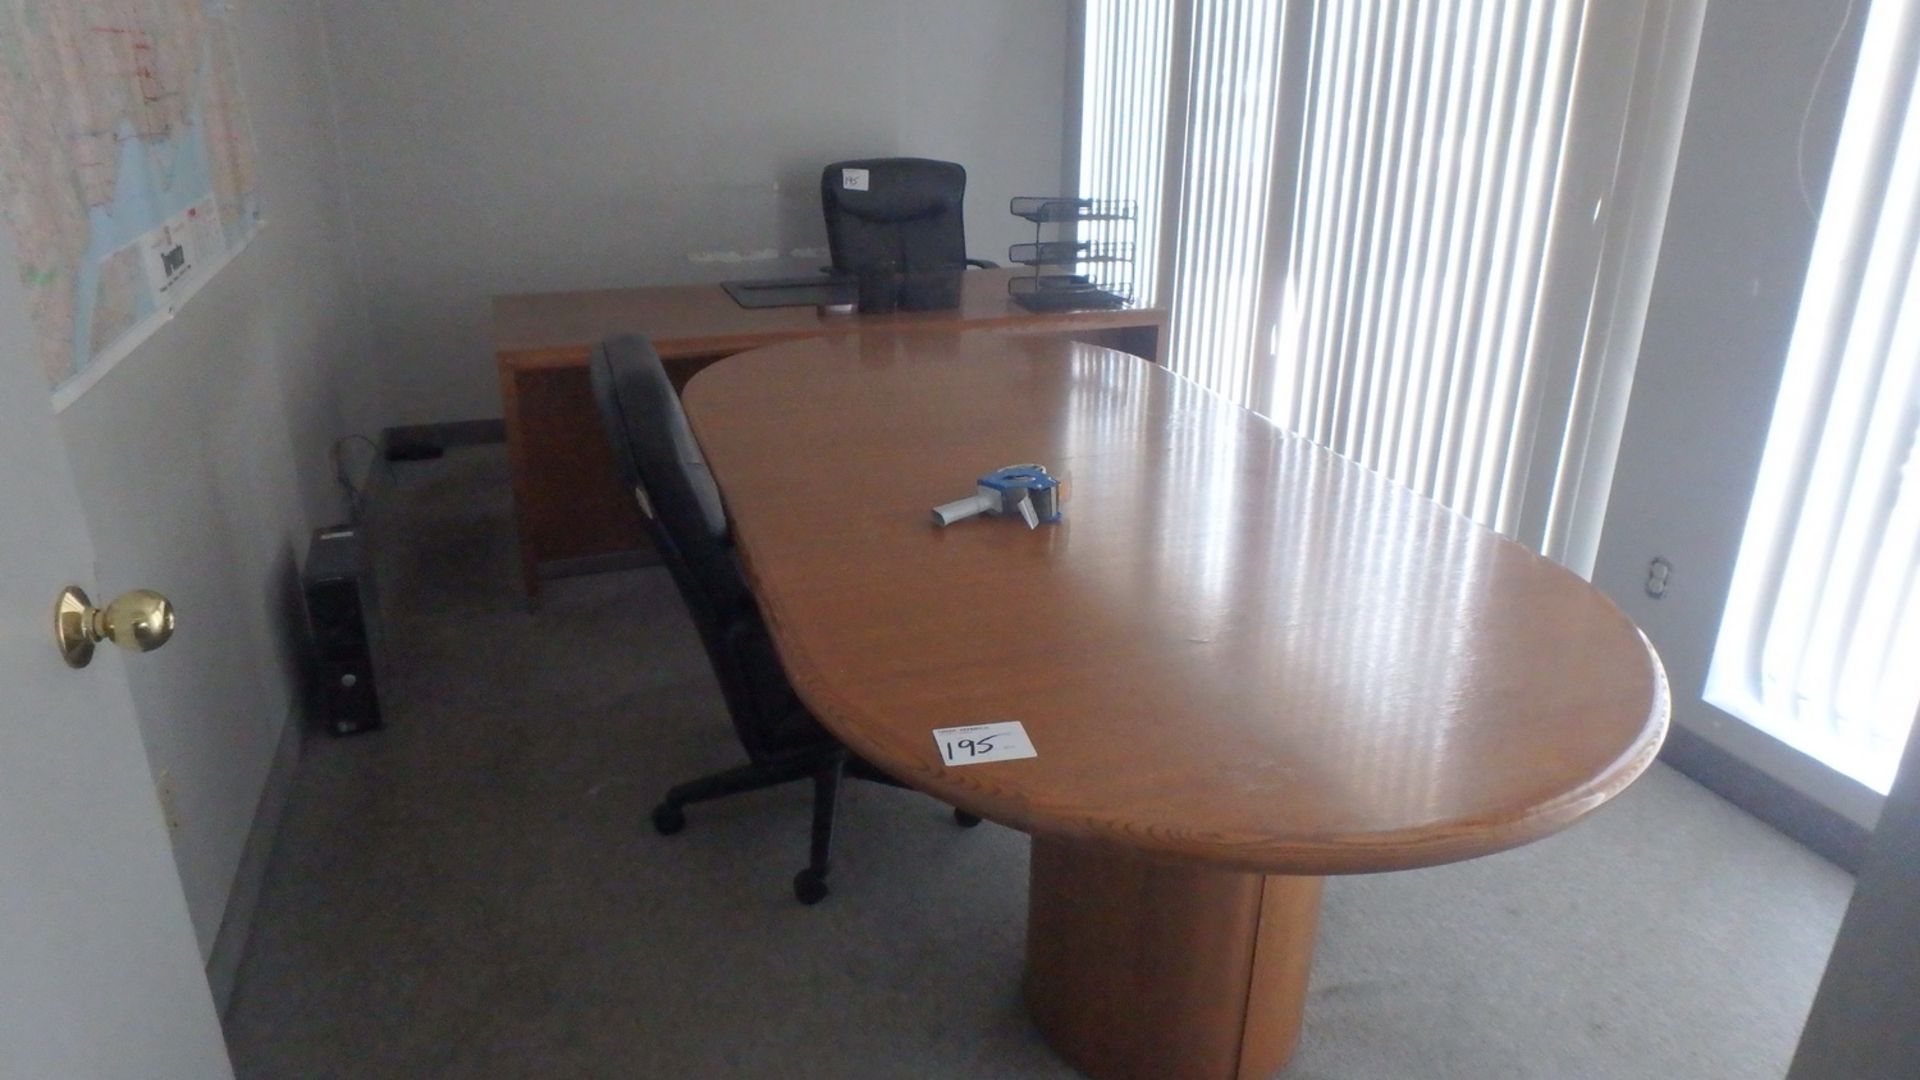 LOT - CONTENTS OF OFFICE C/O: DESK, CHAIRS, BOARDROOM TABLE, ETC.